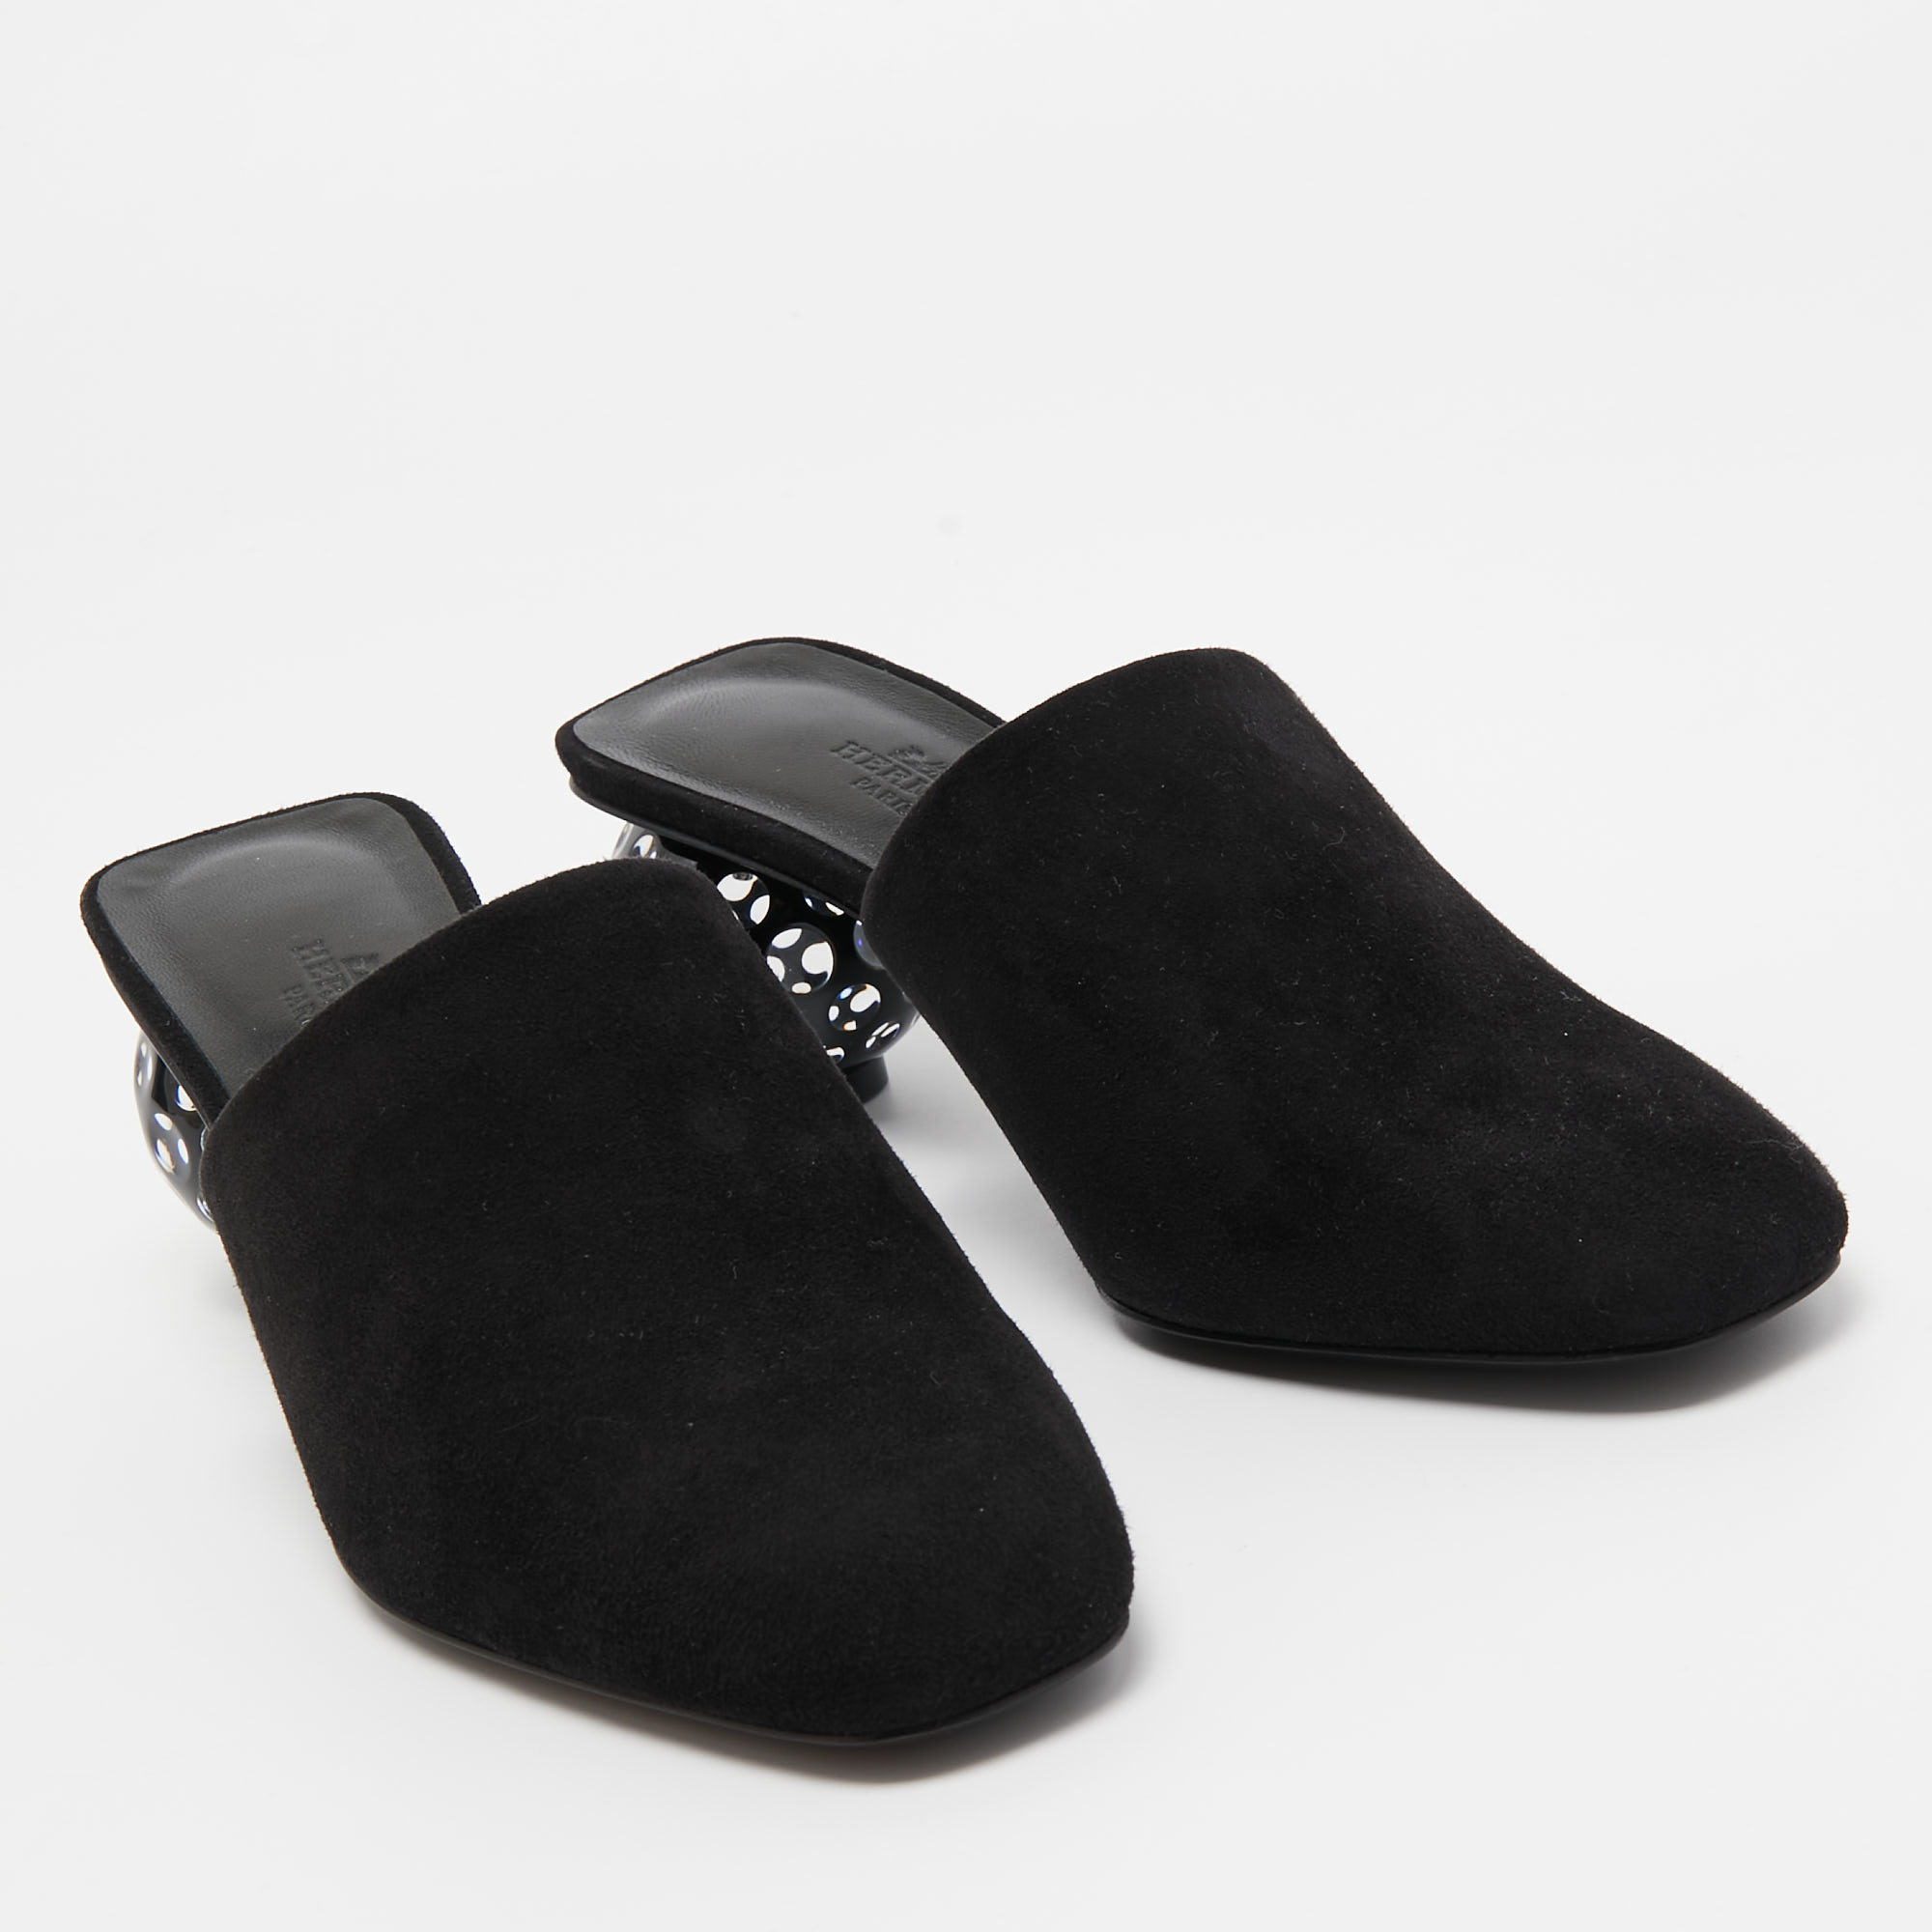 Hermes Black Suede Darcy Mules Size 36.5